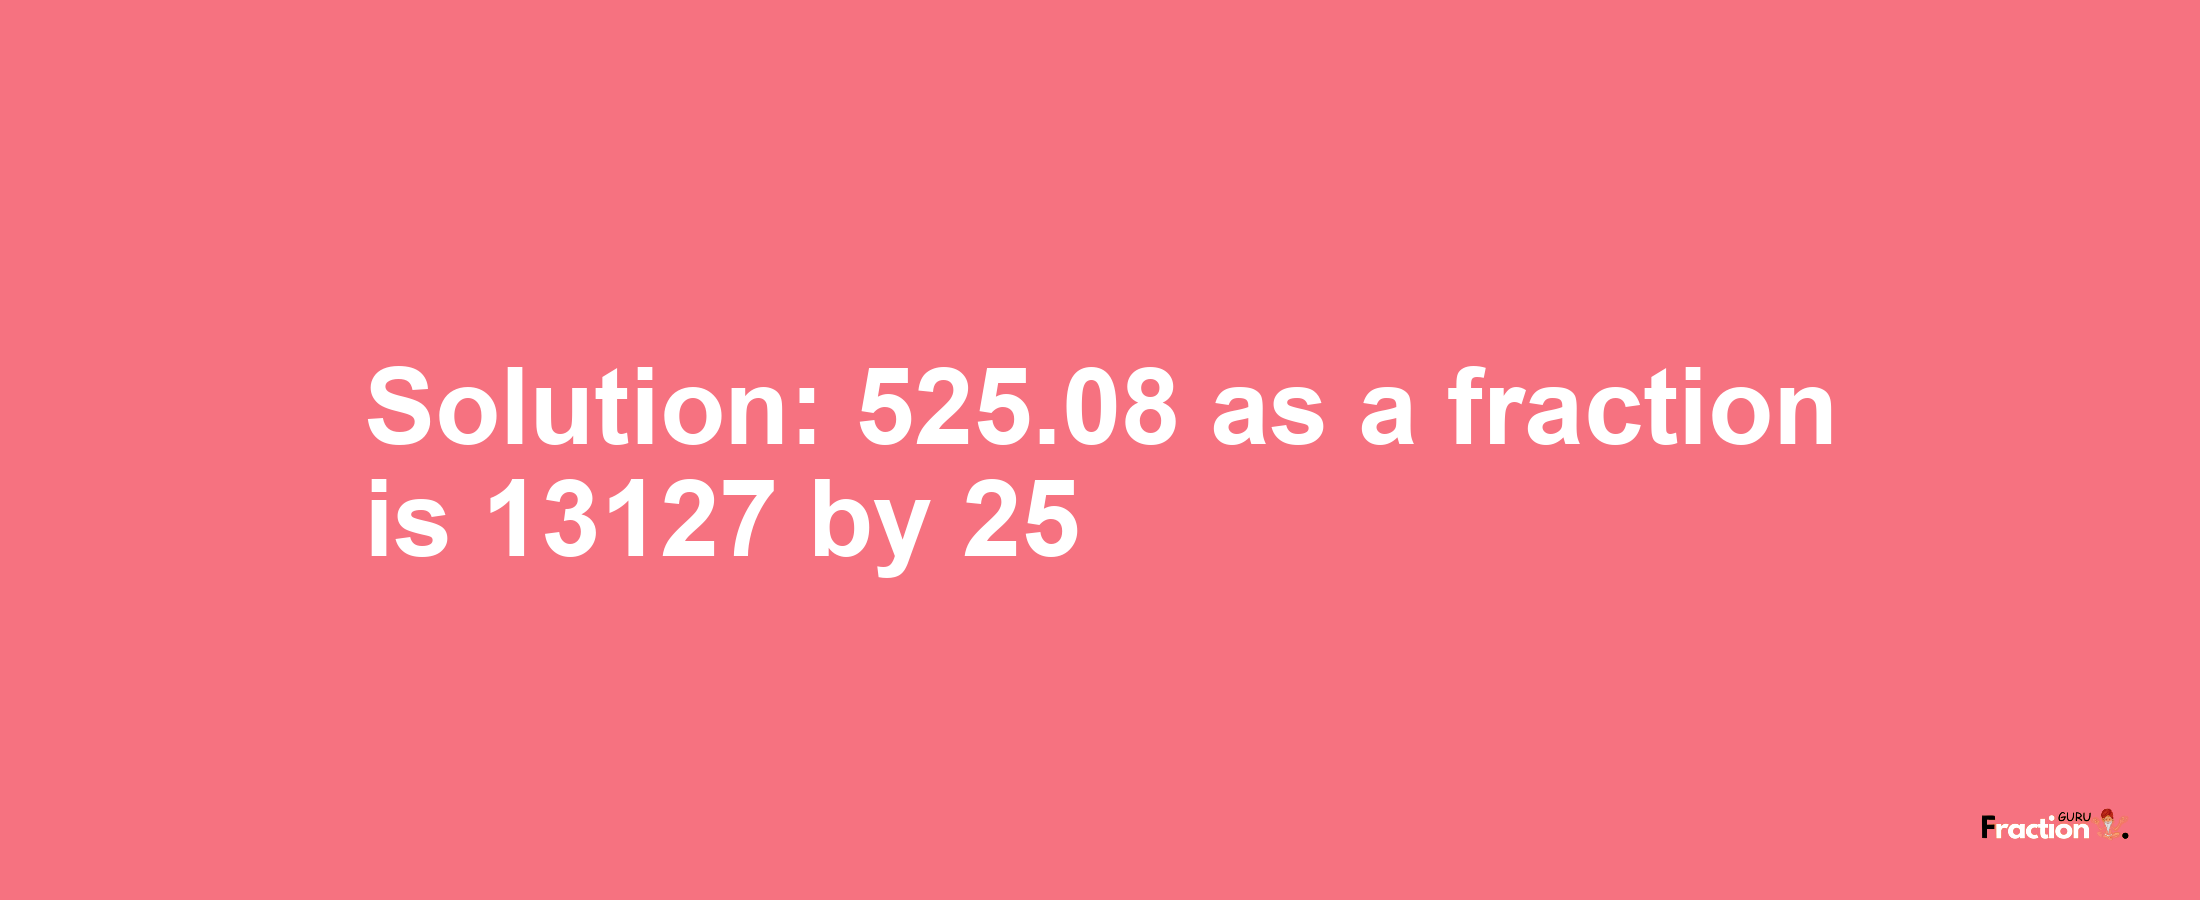 Solution:525.08 as a fraction is 13127/25